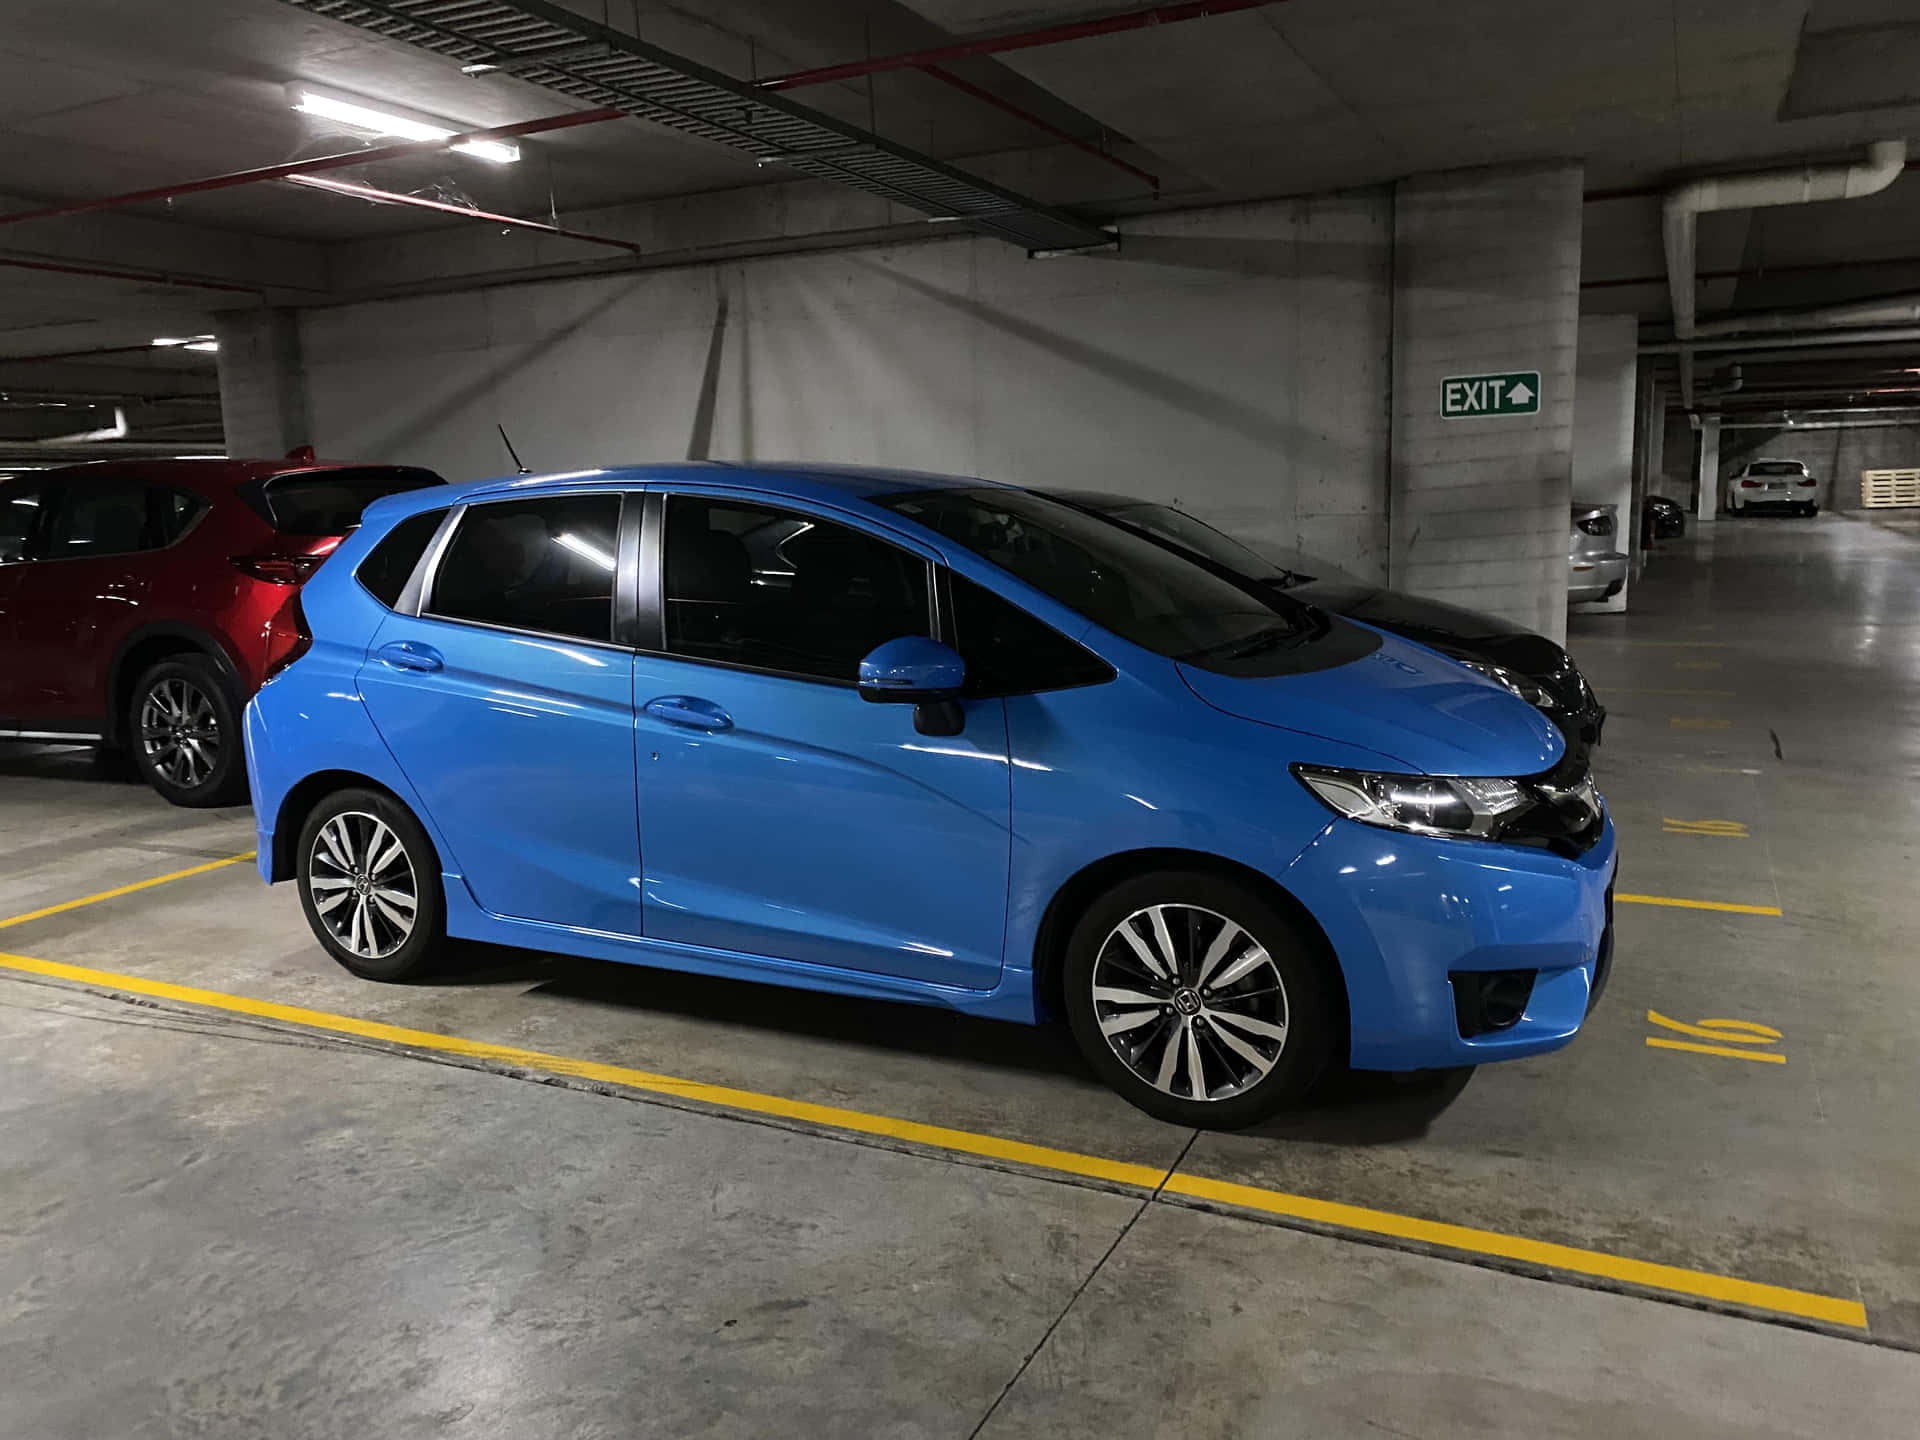 The Superior Honda Fit - Road Agility and Efficiency Wallpaper